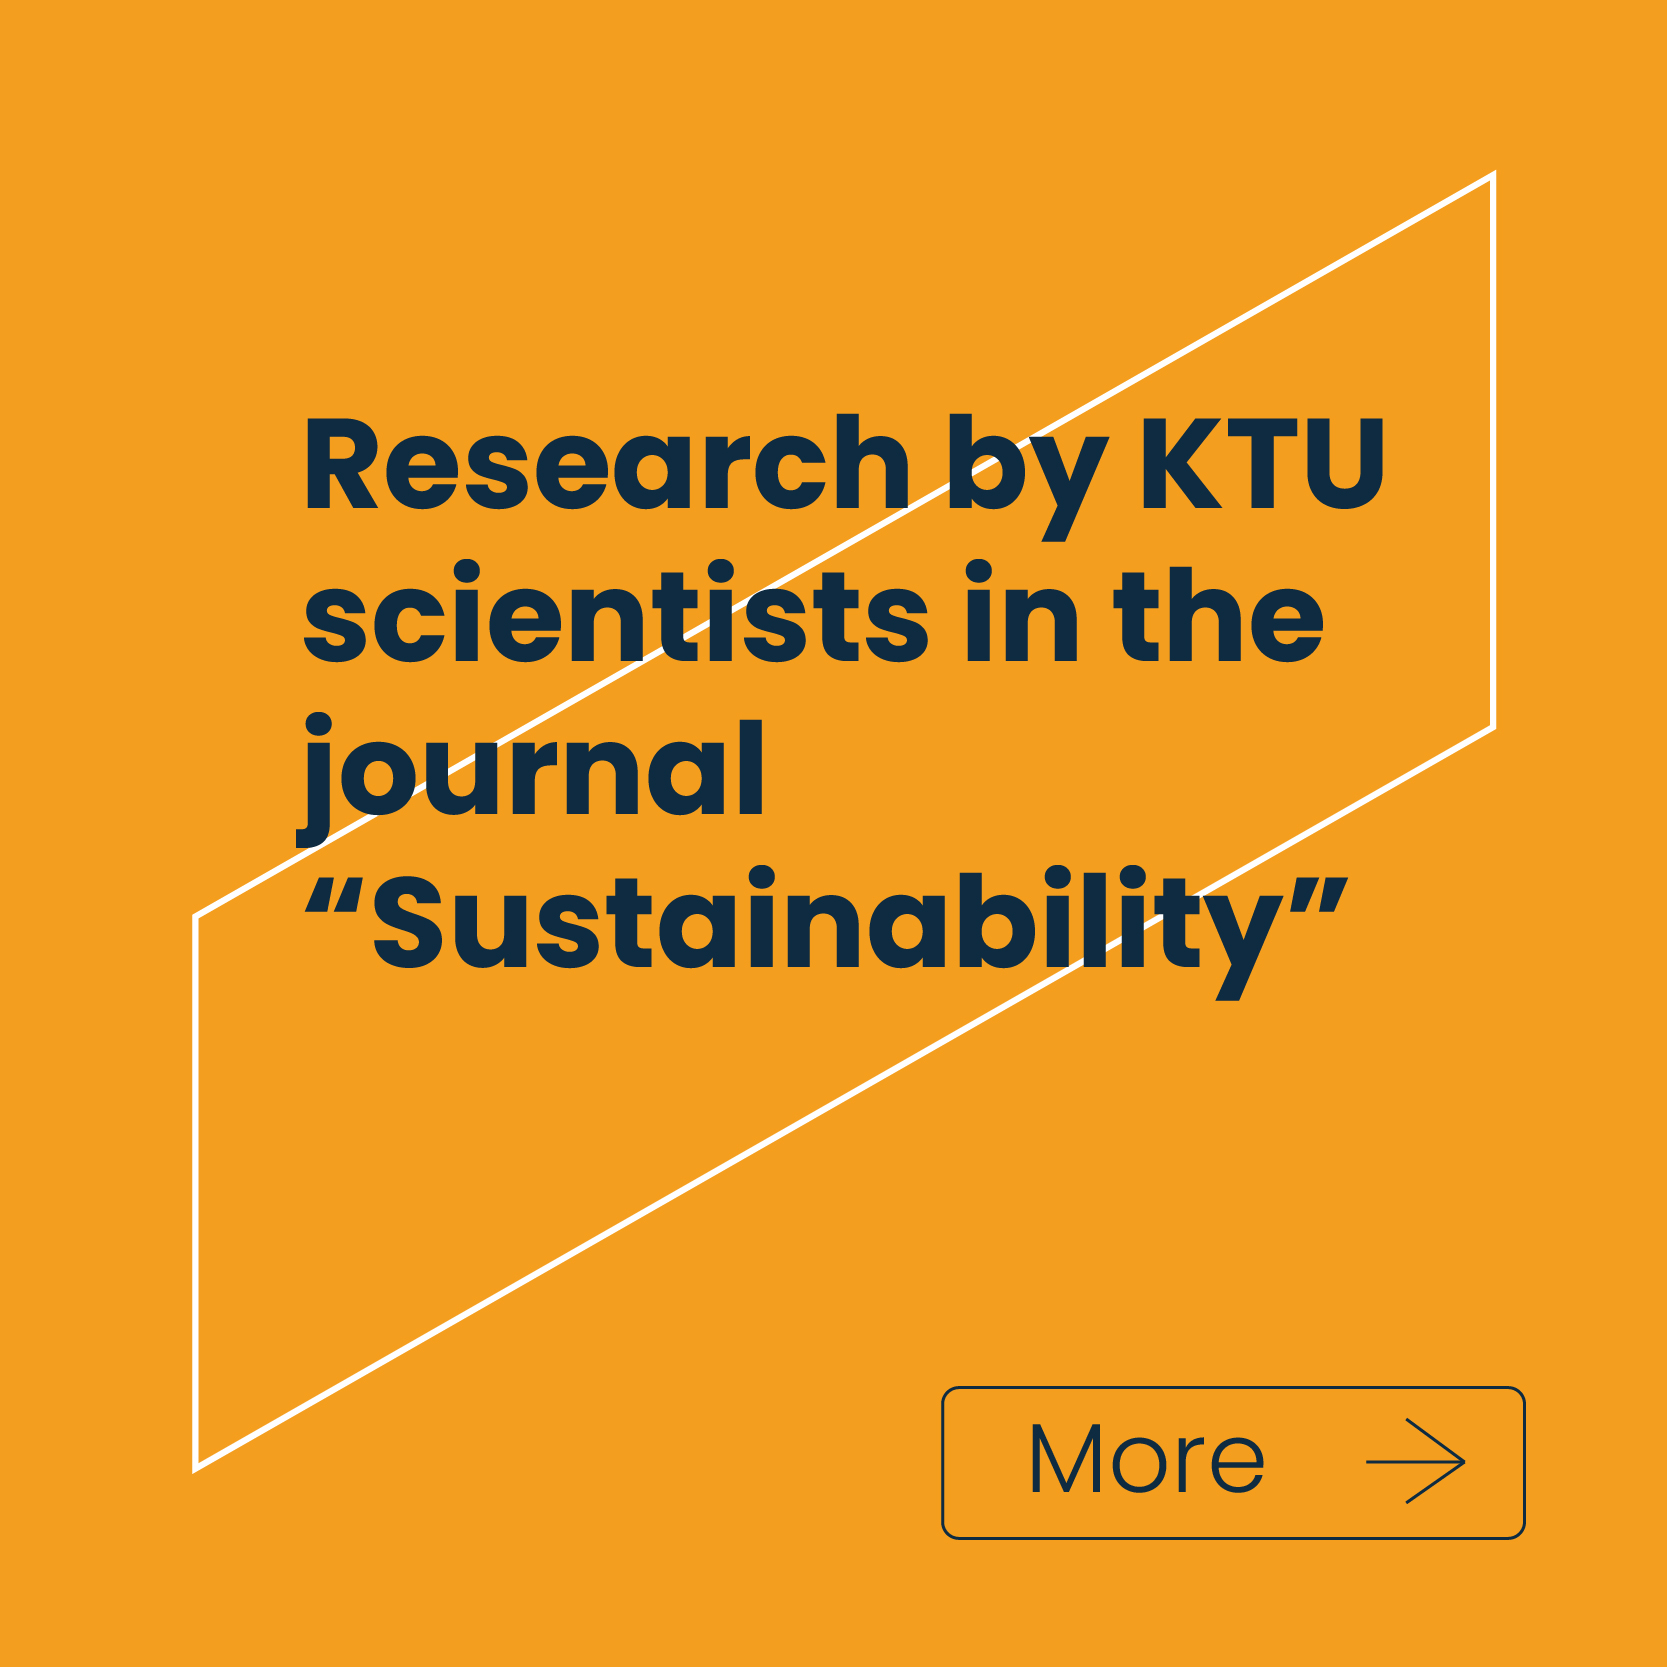 Link to research by KTU scientists in the journal “Sustainability”